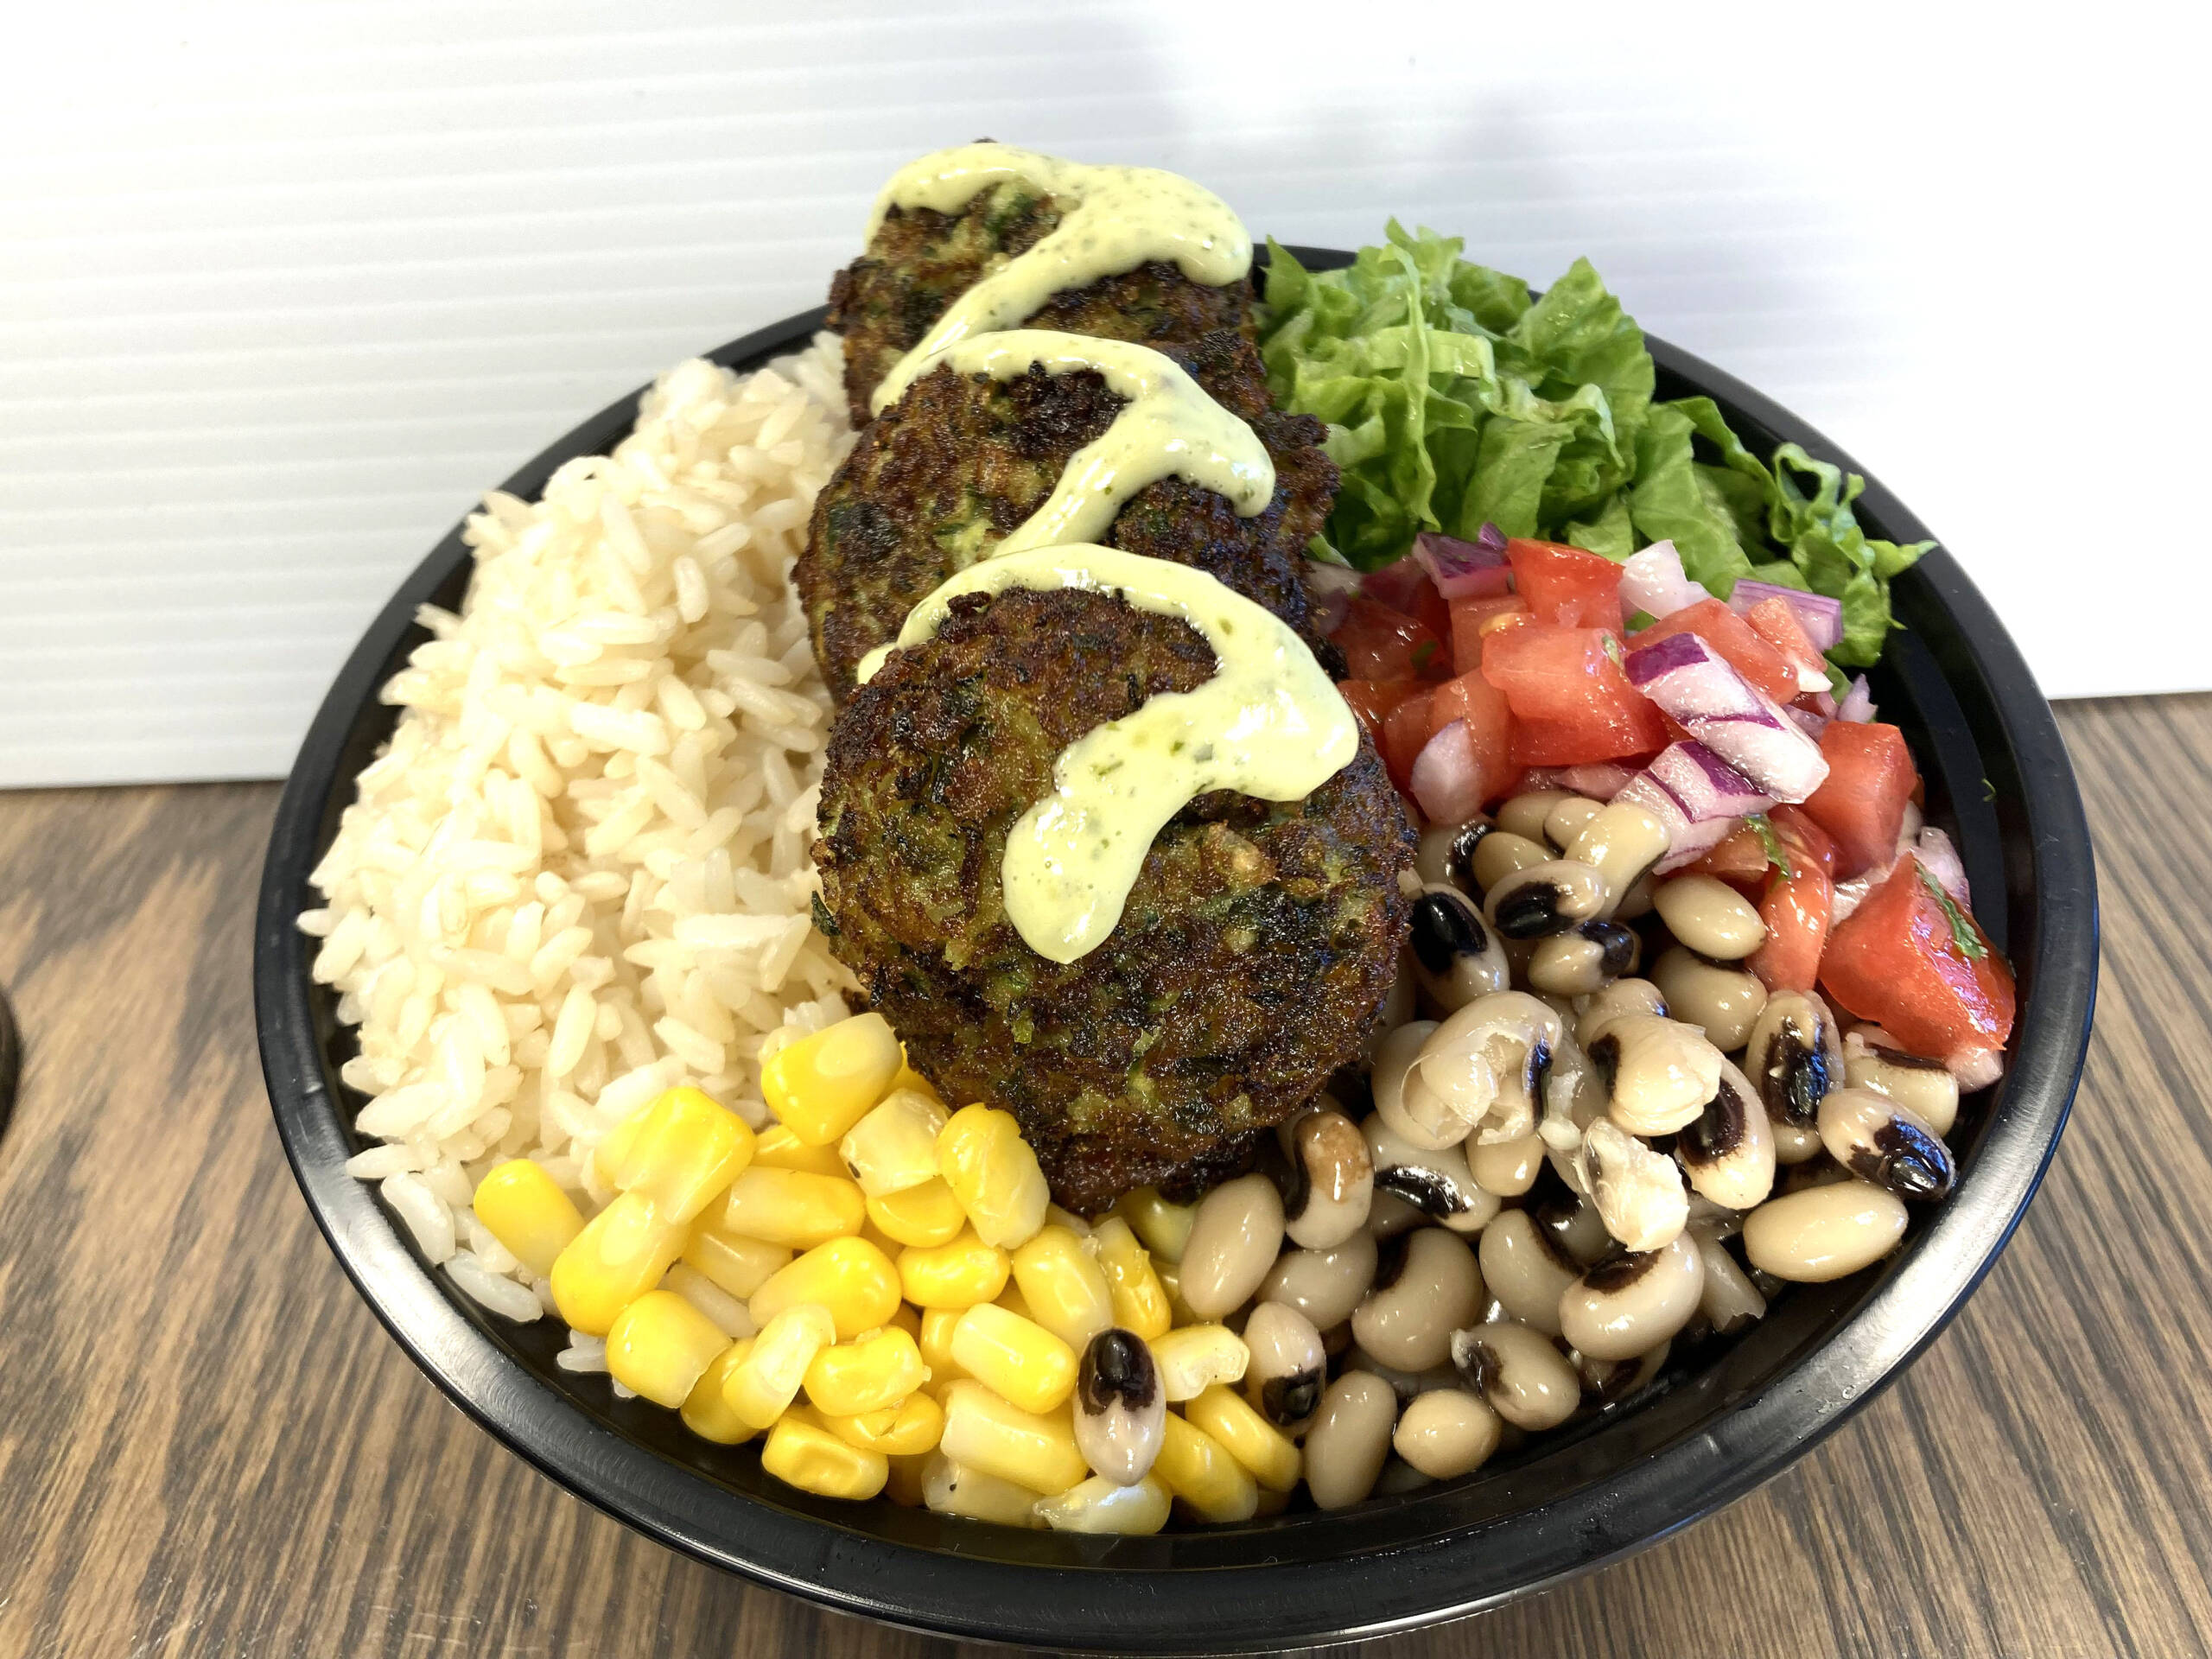 Grilled zucchini bowl served with Mediterranean Rice, Romaine Lettuce, Corn, Black Eyed Beans, Diced Tomato, Diced Red Onions, Cilantro, and Fresh Herb & Cream Sauce